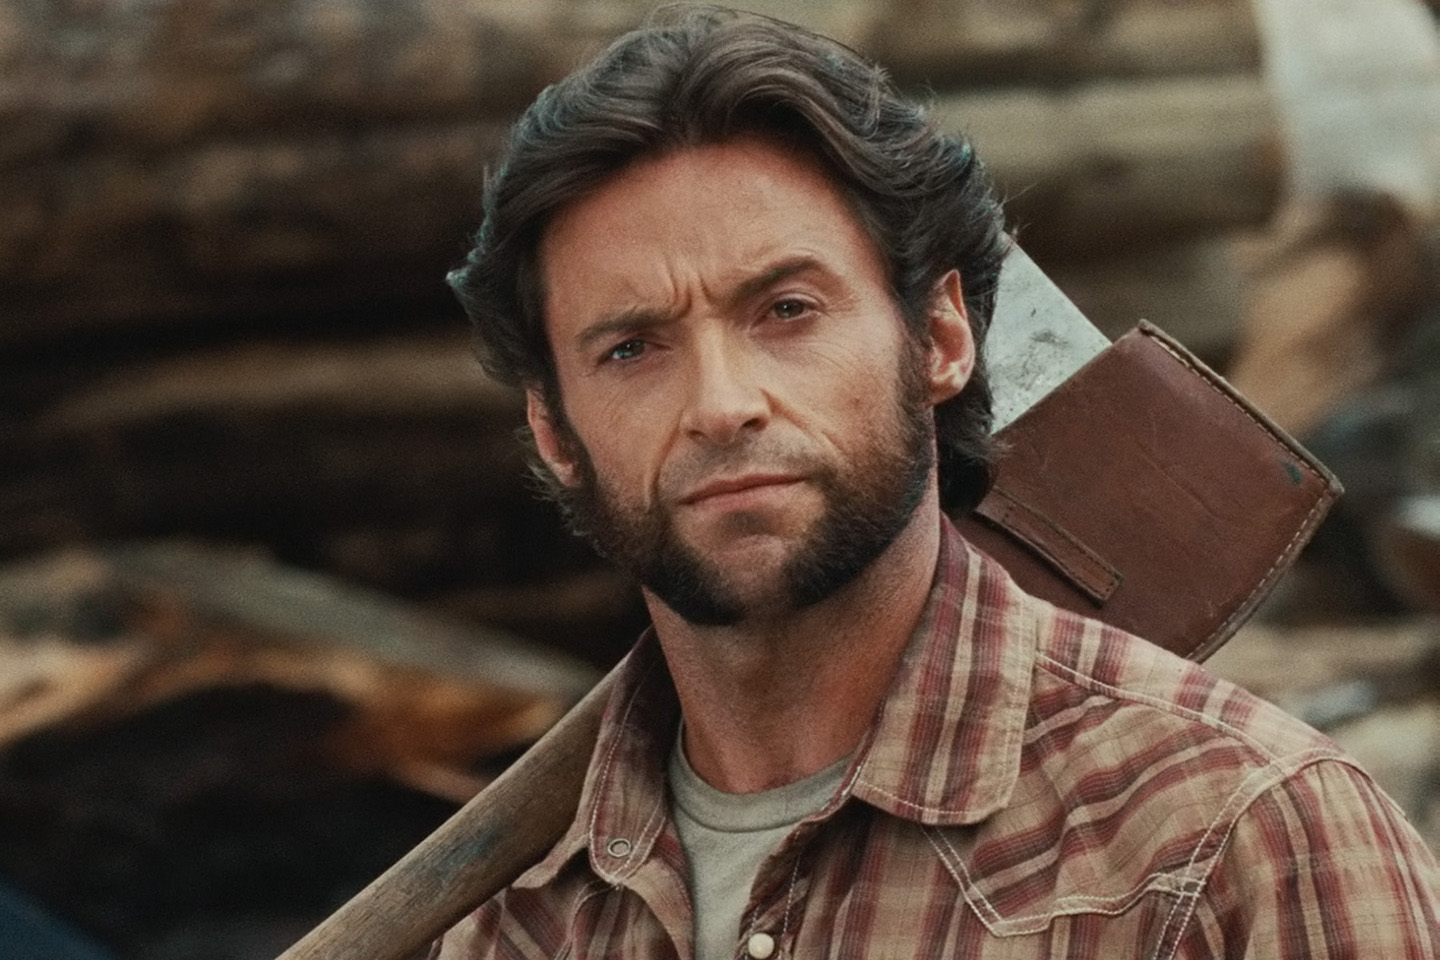 Hugh Jackman Confirms He's Retiring as Wolverine After 'Wolverine 3' (VIDEO)